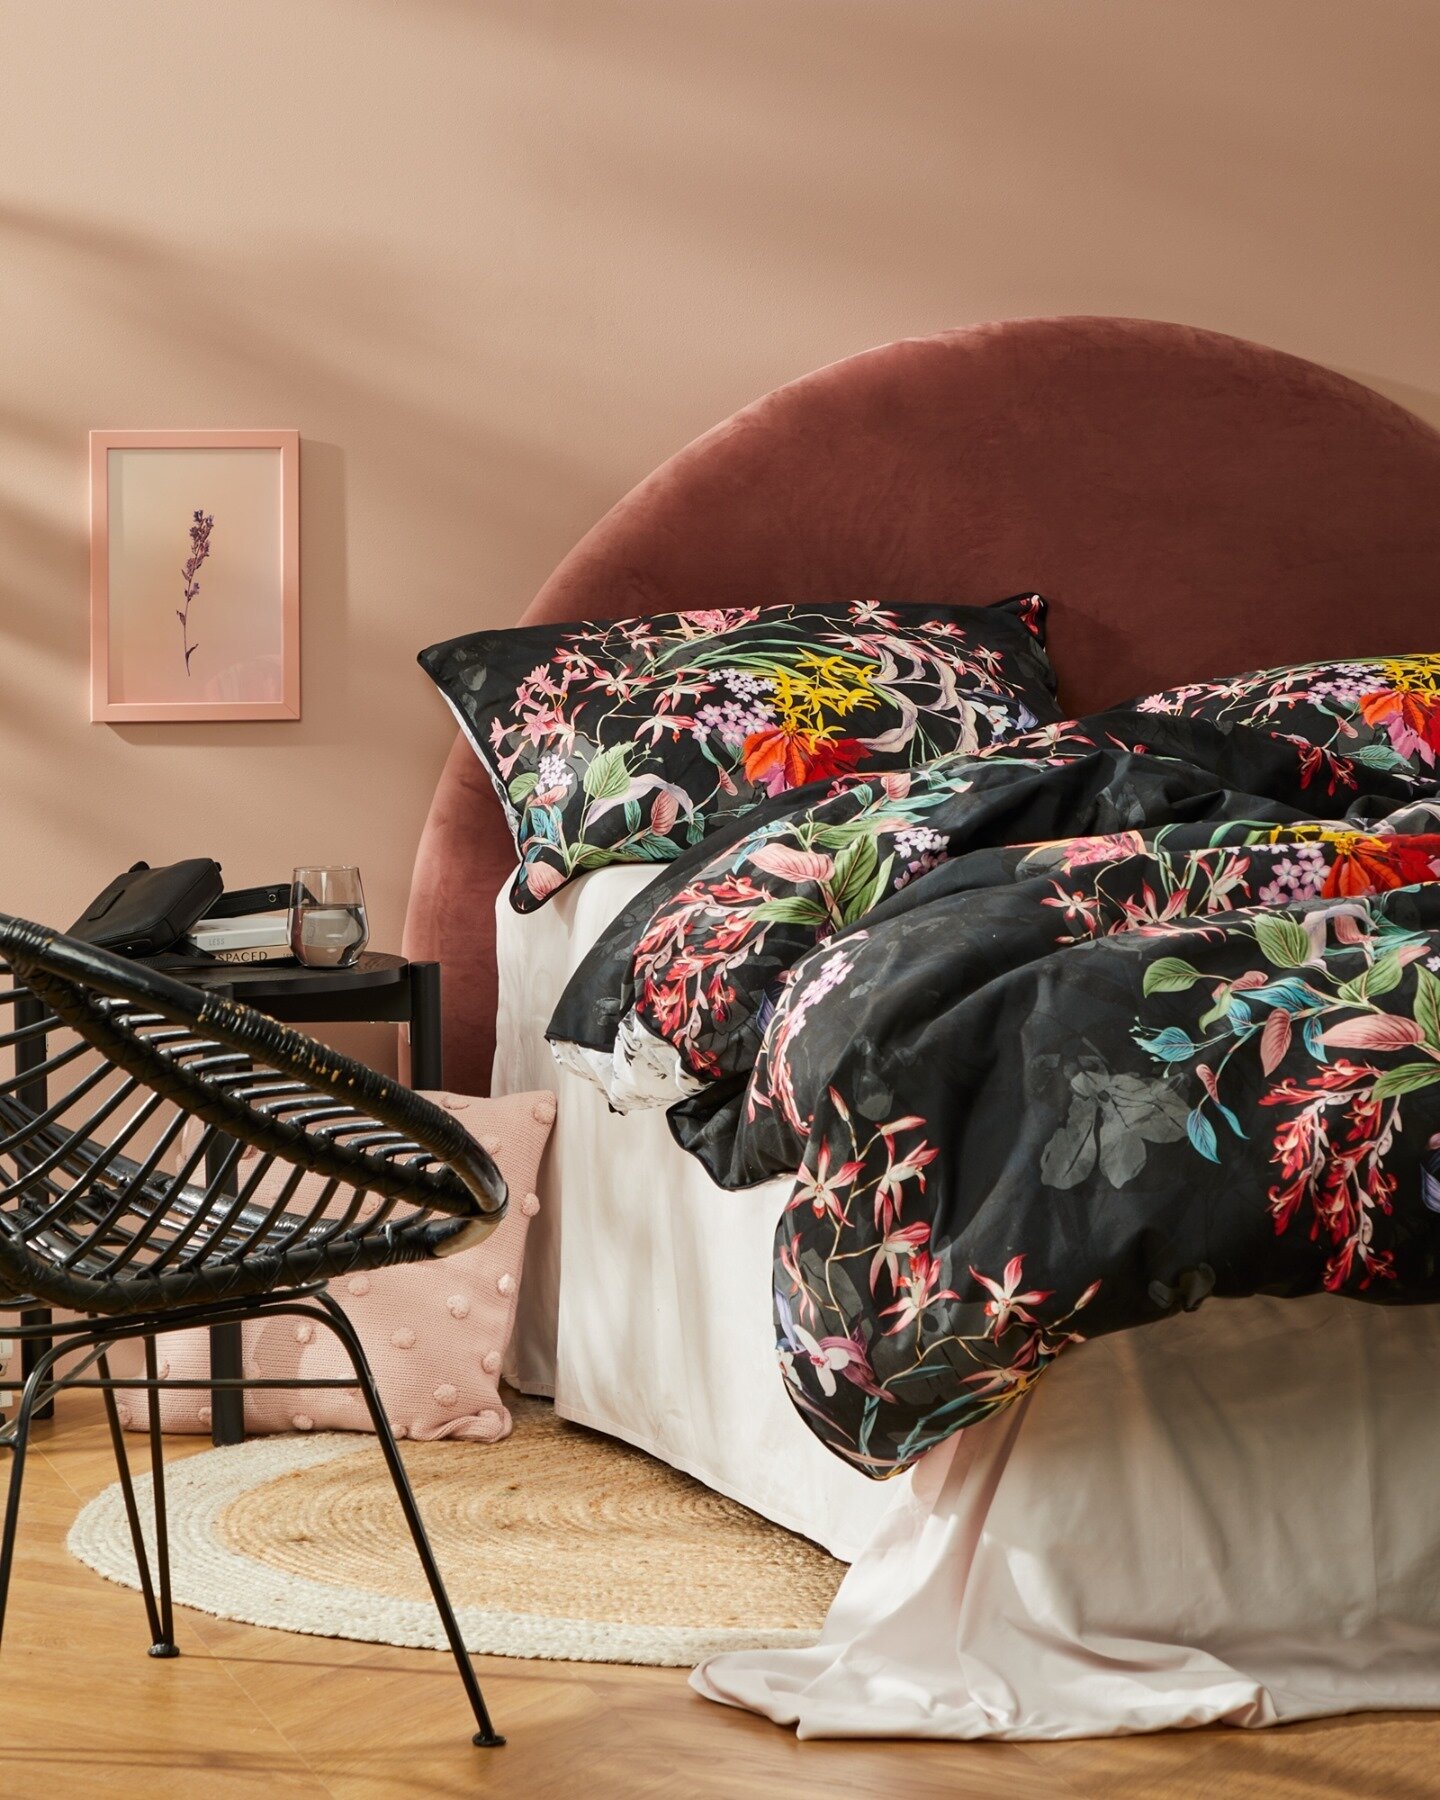 Brightly coloured flowers pop against the dark⁠
background of @loganandmason_'s Dendy Black. ⁠
⁠
This style takes on a contemporary feel paired with a modern bedhead, but looks just as striking with a deep grey palette.⁠
⁠
#dendy #spotlight